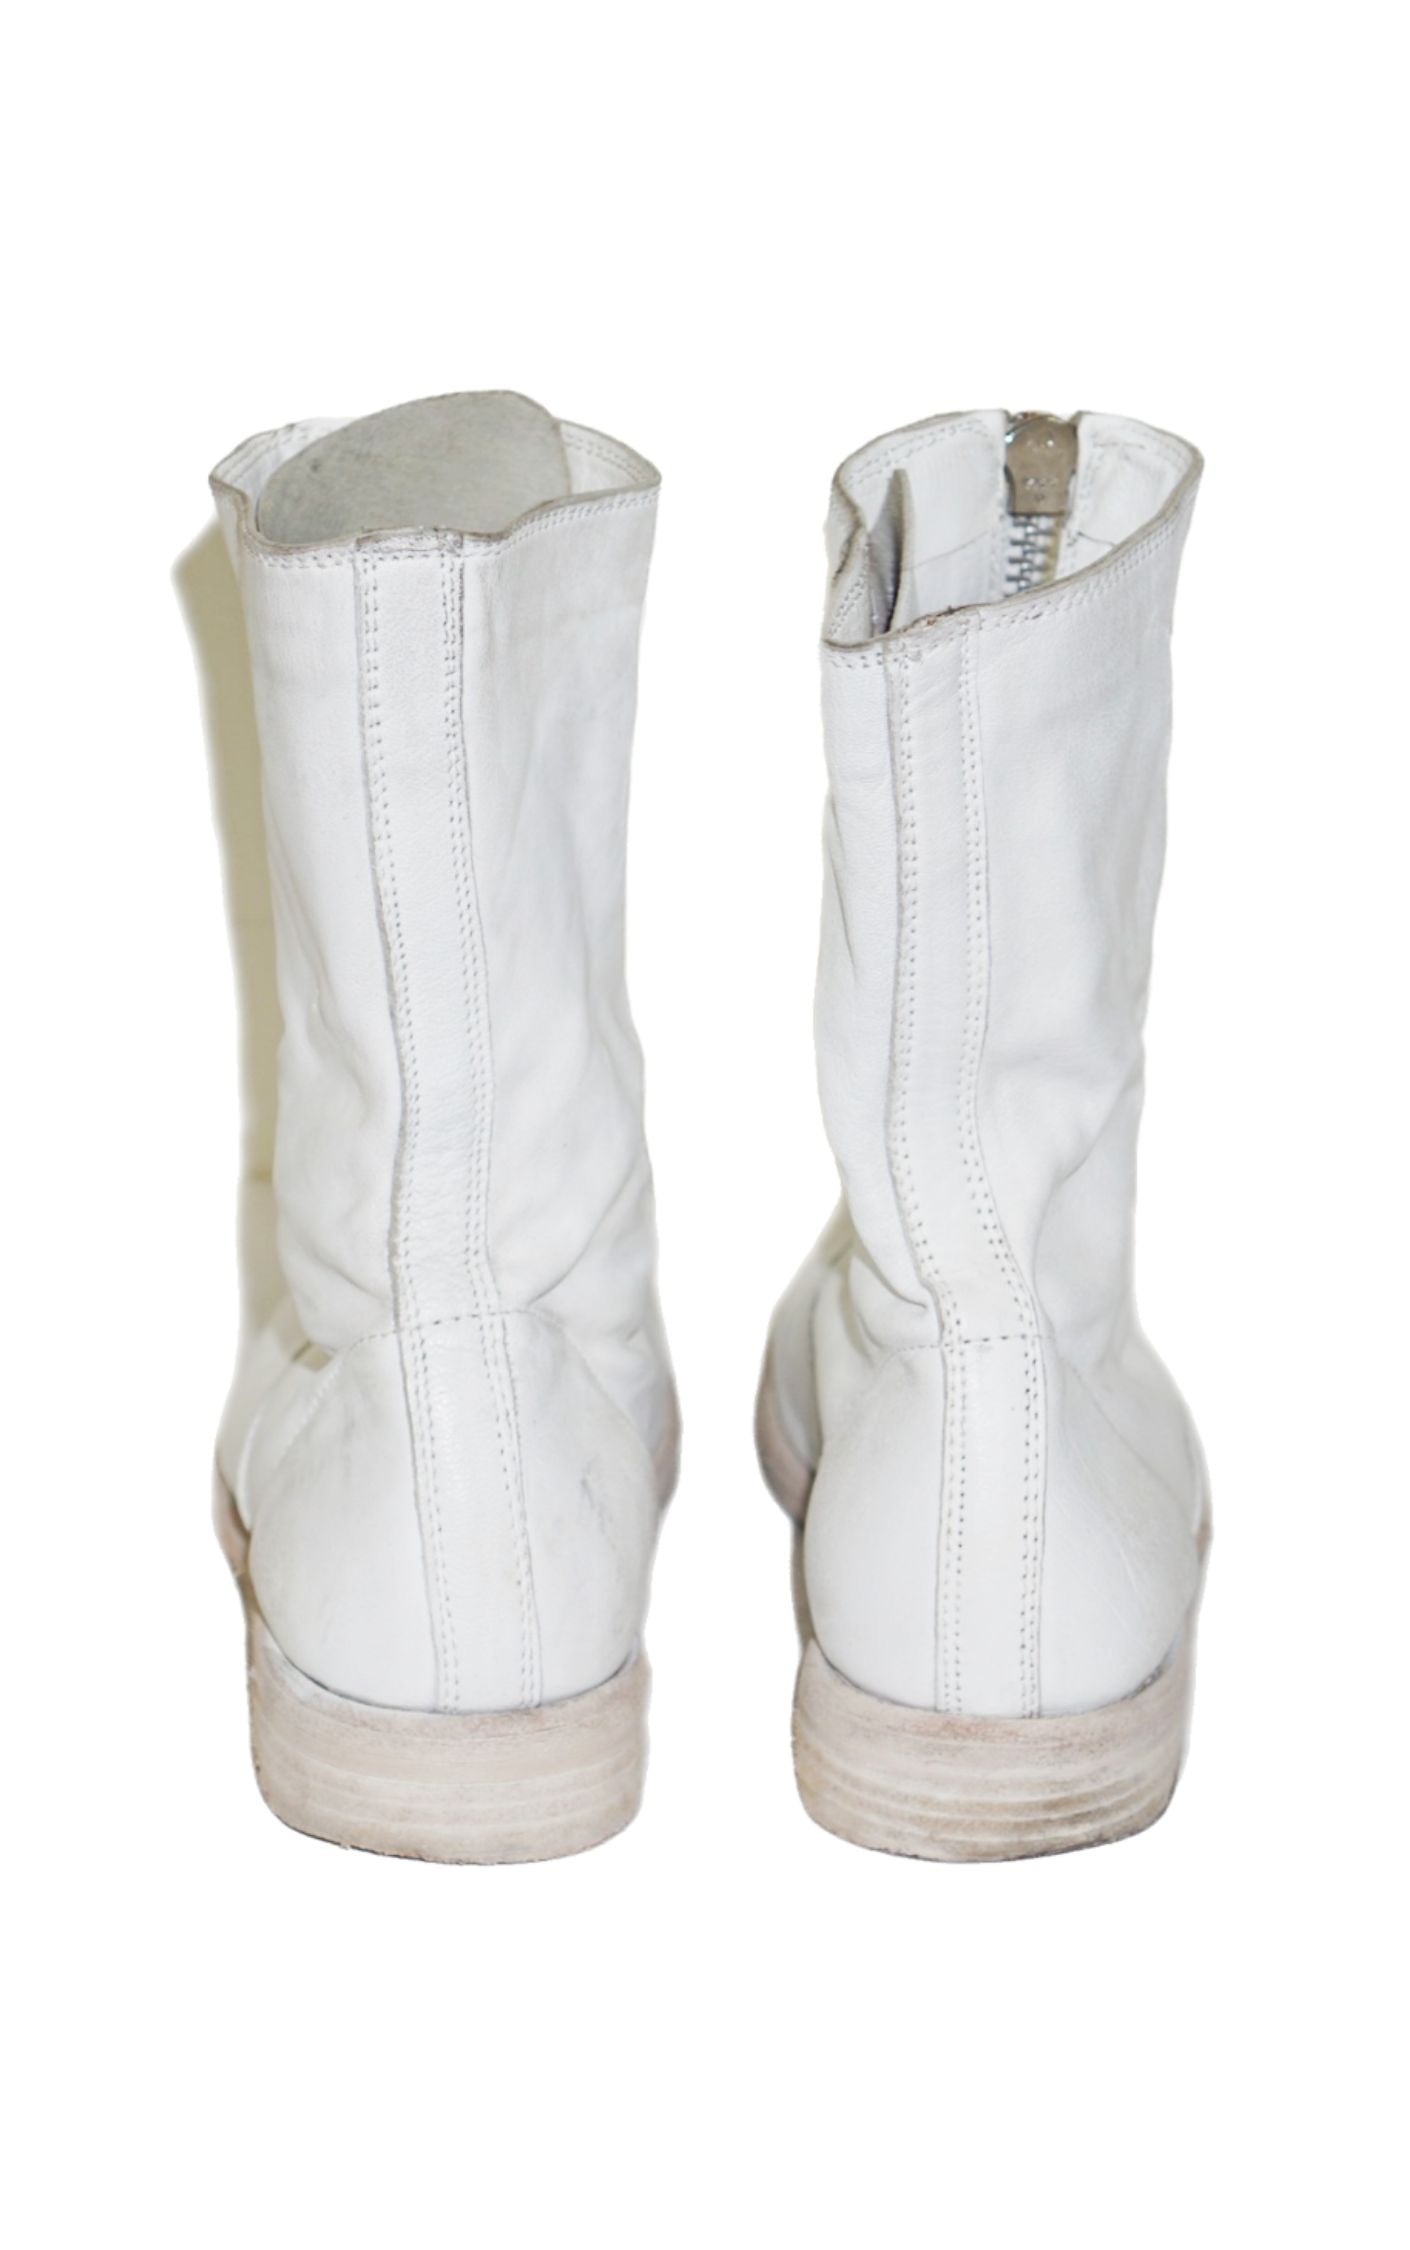 JEFFREY CAMPBELL White Leather Front Zip Guidi Style Boots resellum